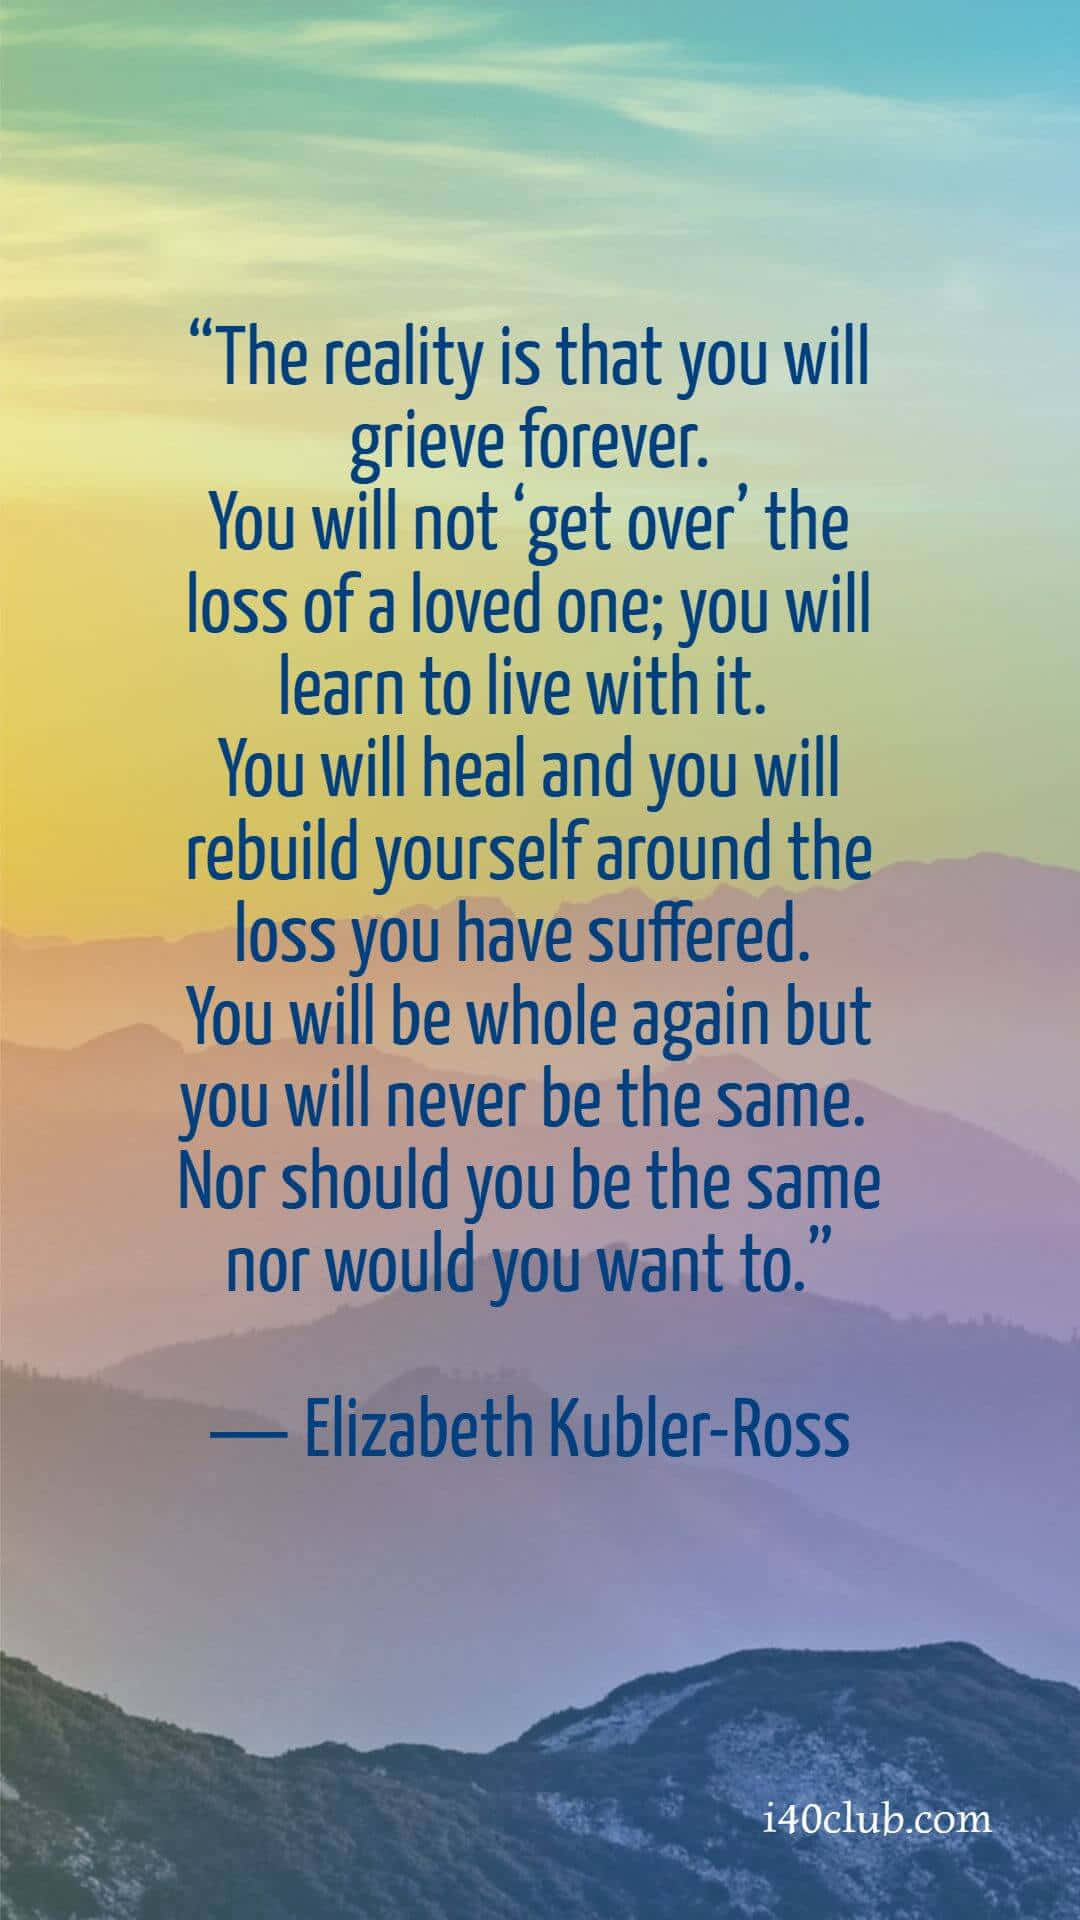 mourning the loss of a loved one quotes